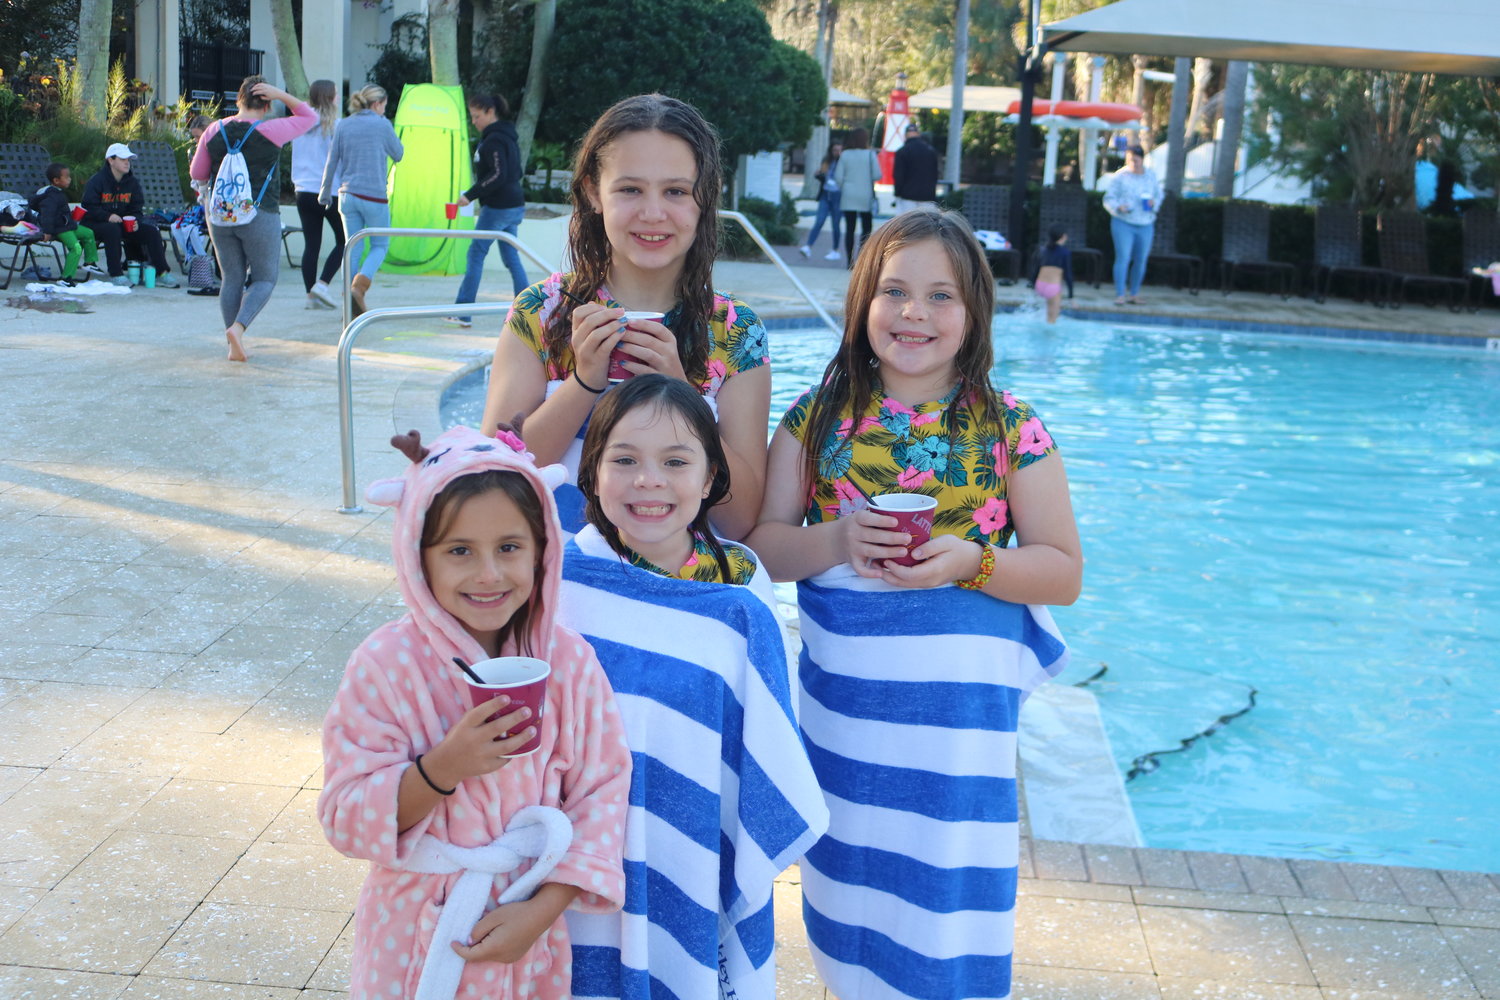 Leana Zunno, Abby Wagner, Avery Leyland and Sadie Wagner try to warm up after taking part in the Nocatee Polar Plunge.